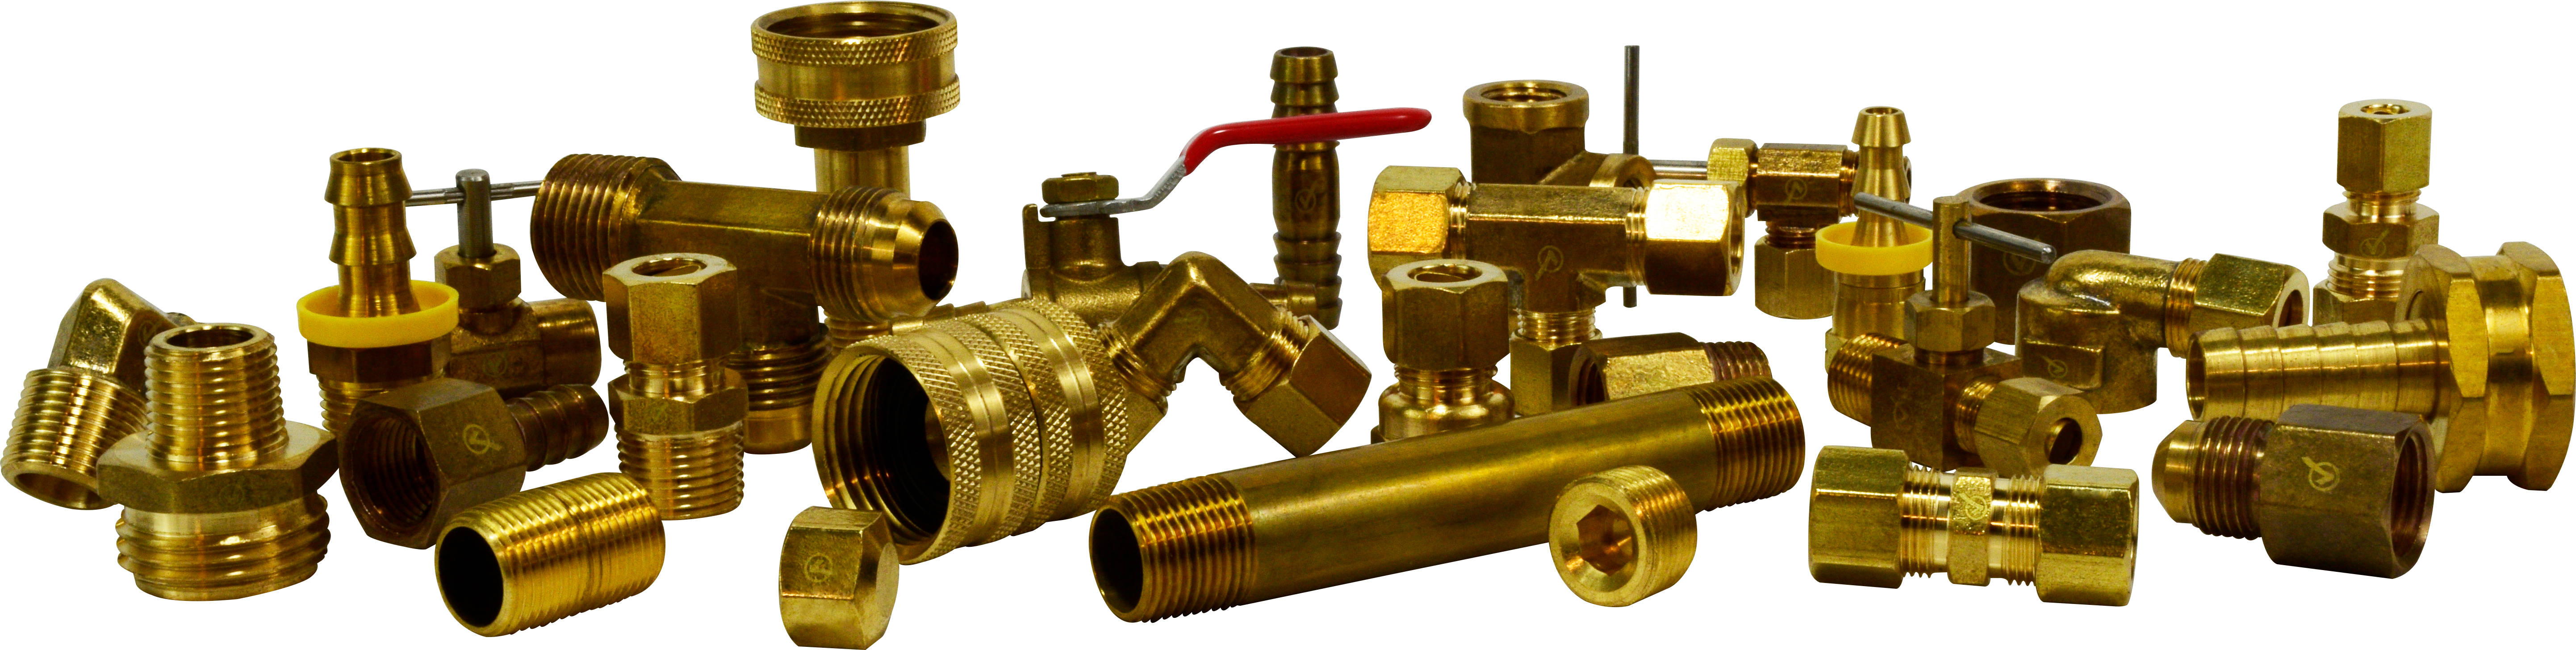 control valves in various systems